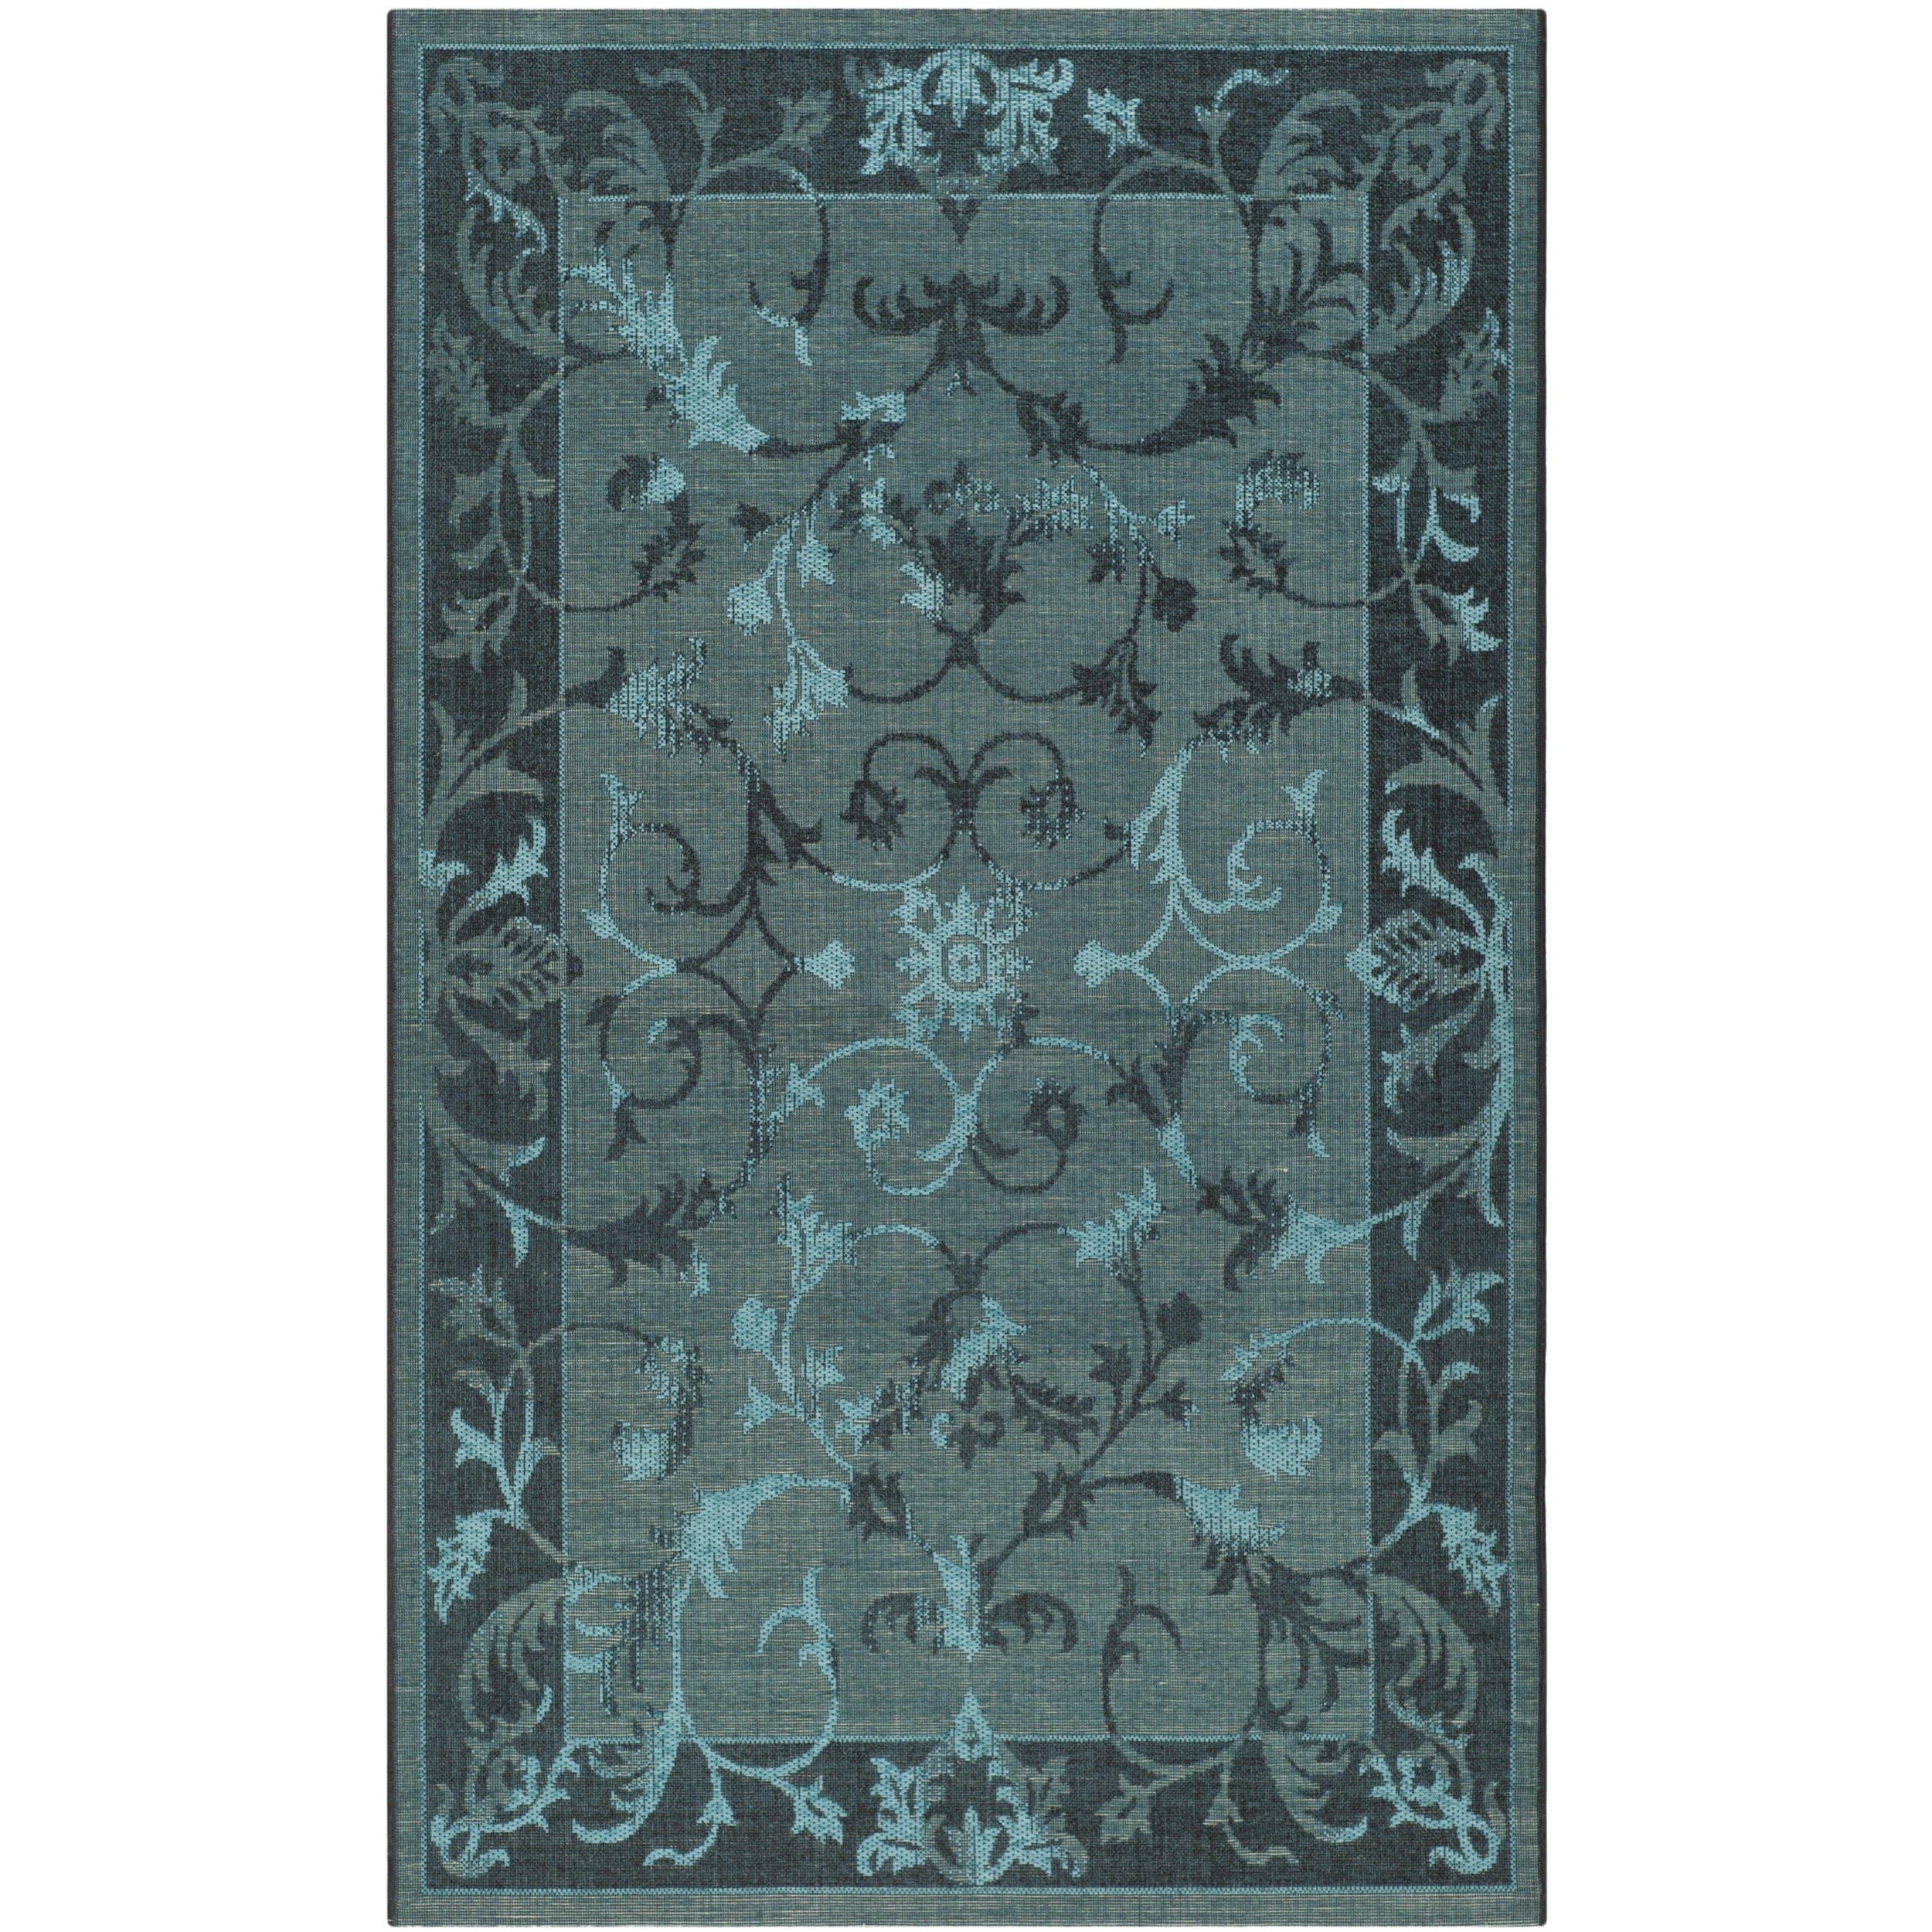 Safavieh Palazzo Transitional Black/turquoise Overdyed Chenille Rug (3 X 5)